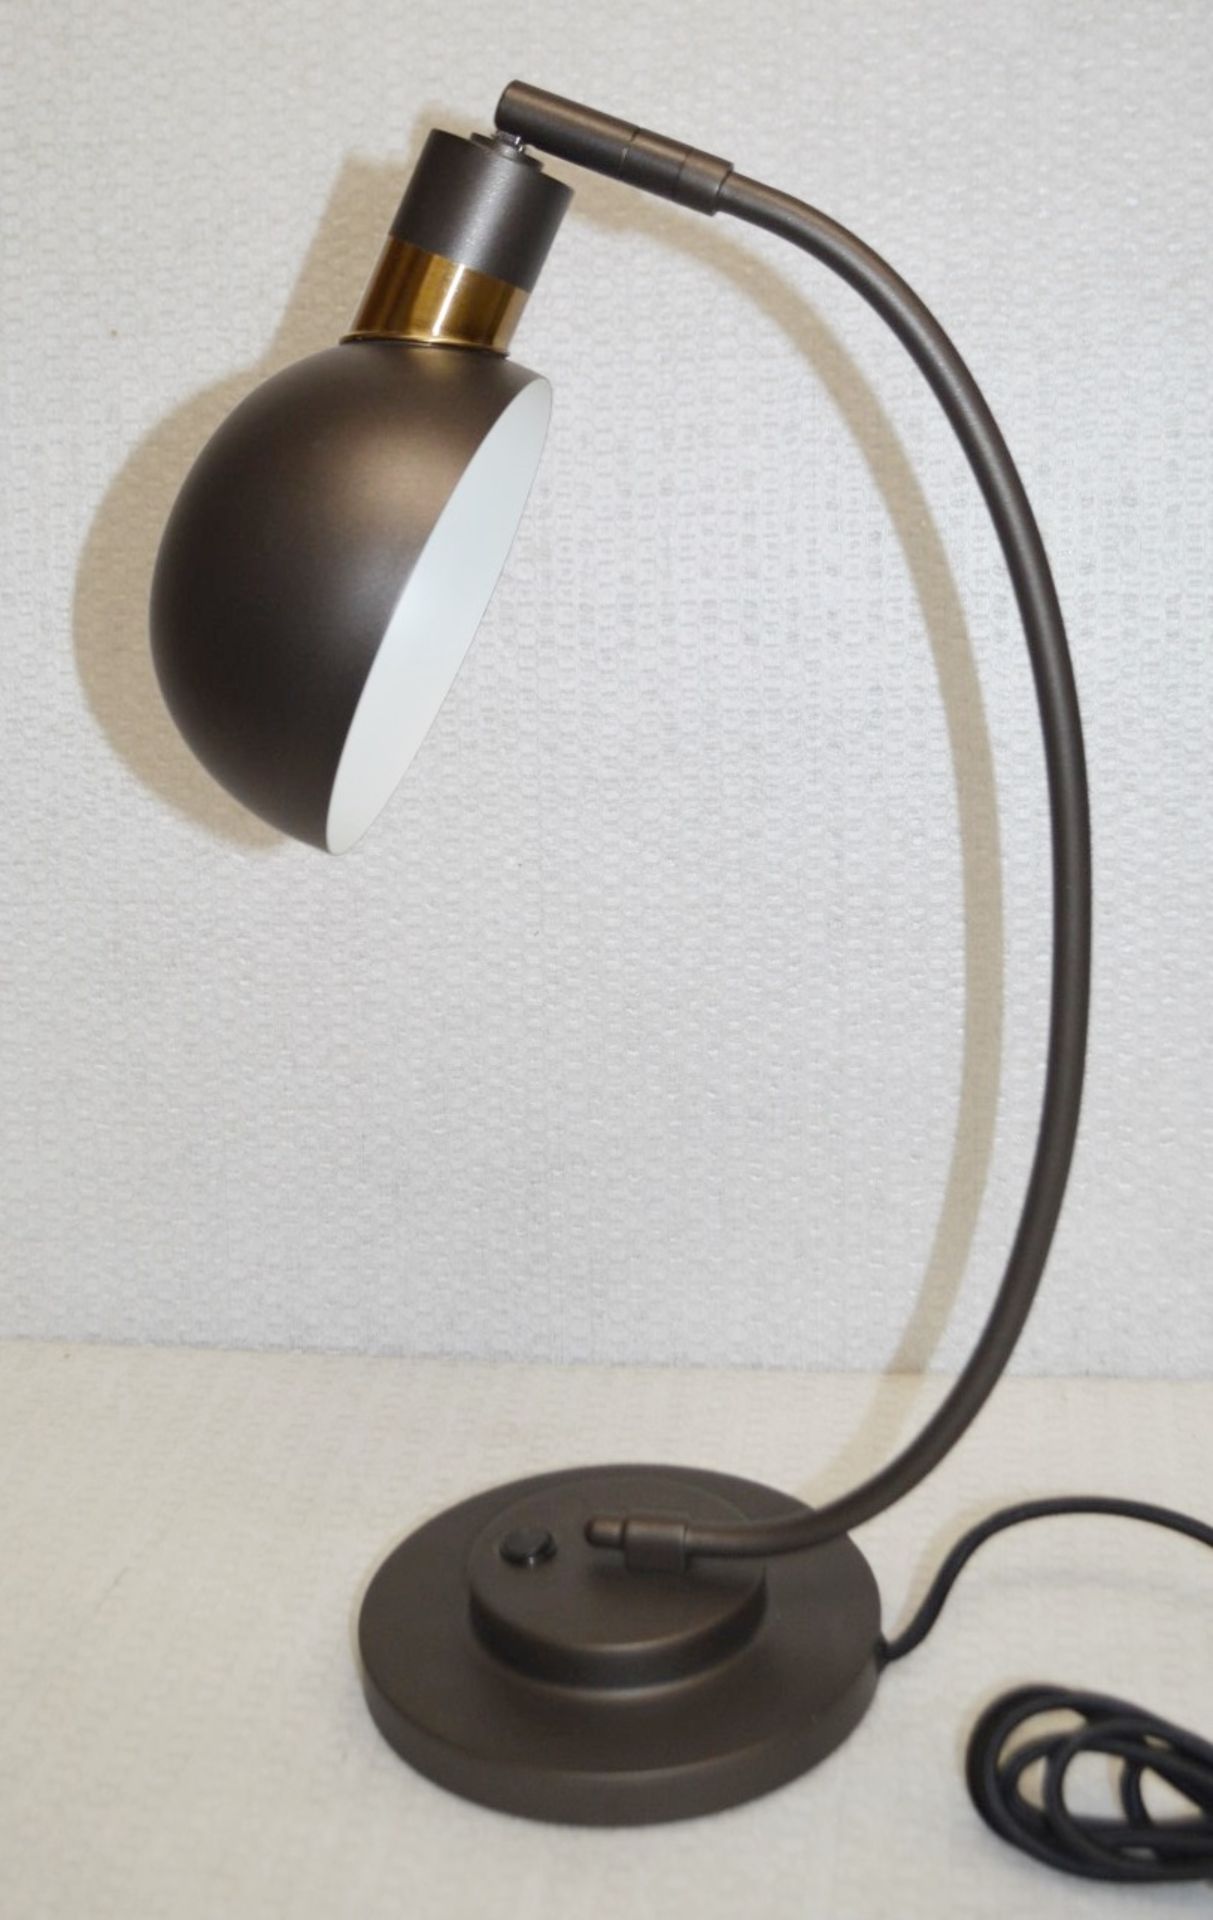 1 x CHELSOM Desk Table Lamp In A Black Bronze Finish With Polished Brass Accent - Image 3 of 7